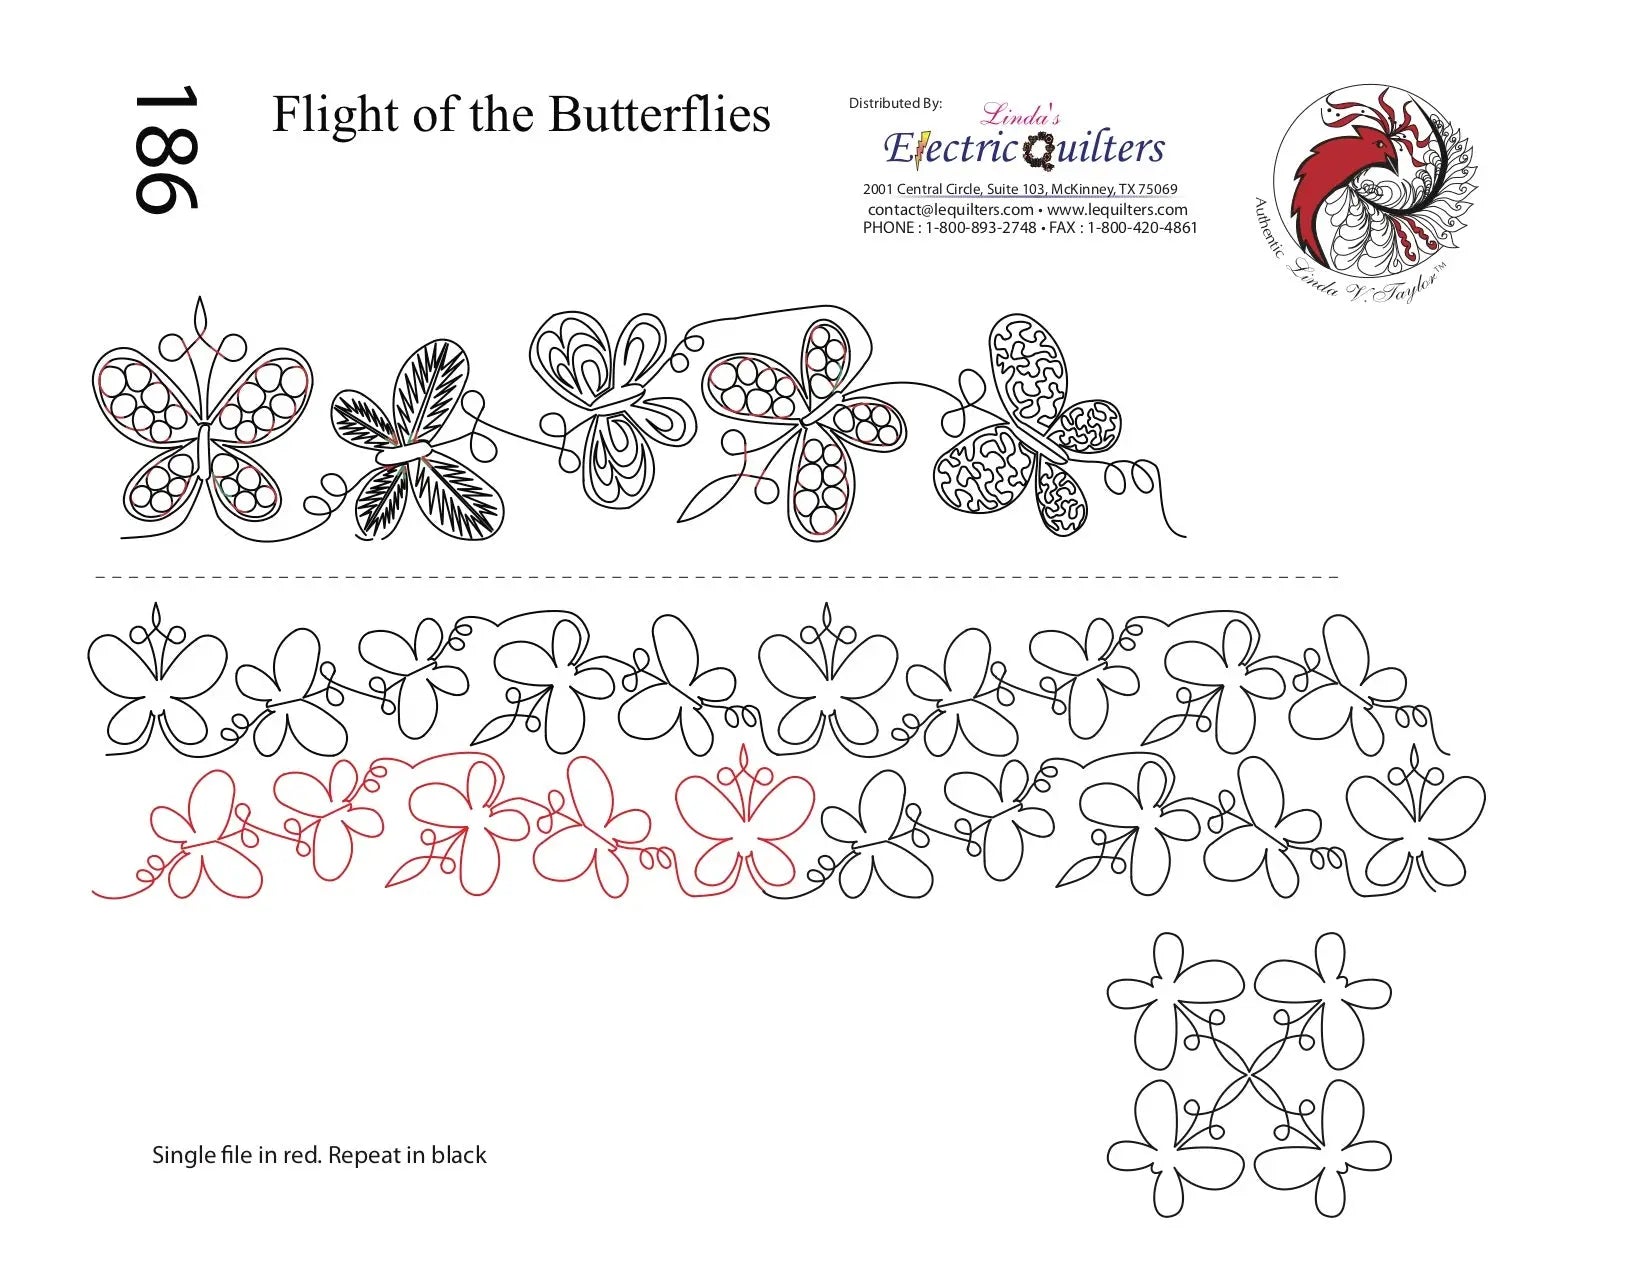 186 Flight Of The Butterflies Pantograph with Blocks by Linda V. Taylor - Linda's Electric Quilters